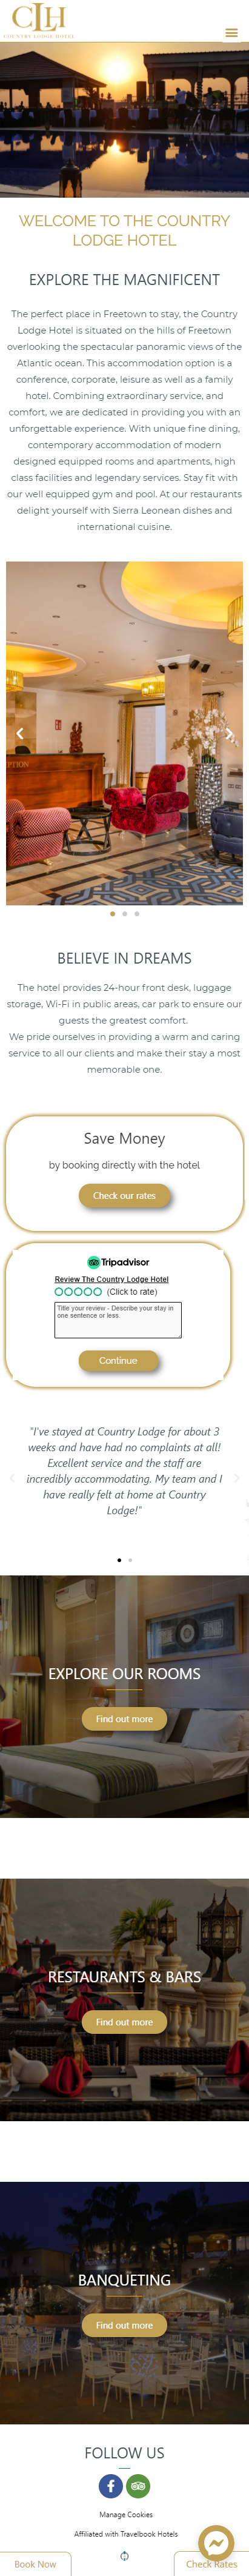 Mobile design for Country Lodge Hotel